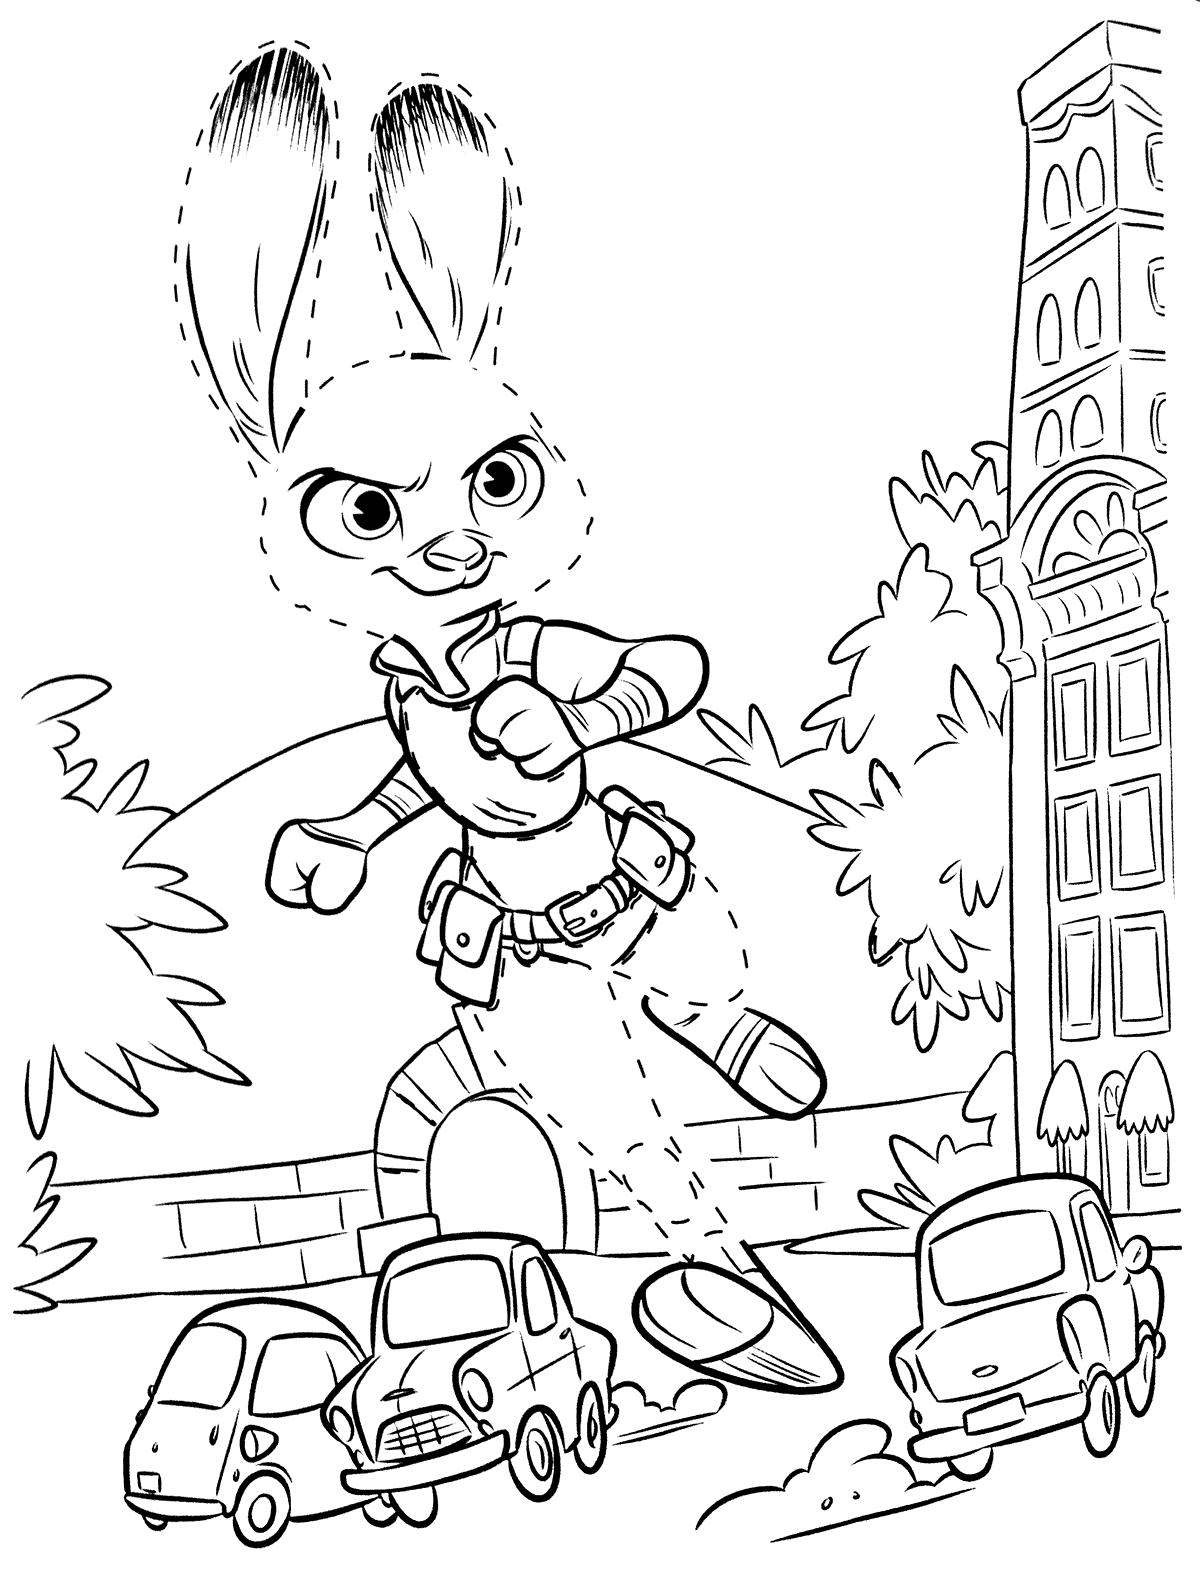 Zootopia Coloring Pages TV Film Zootopia Sheets Printable 2020 12045 Coloring4free